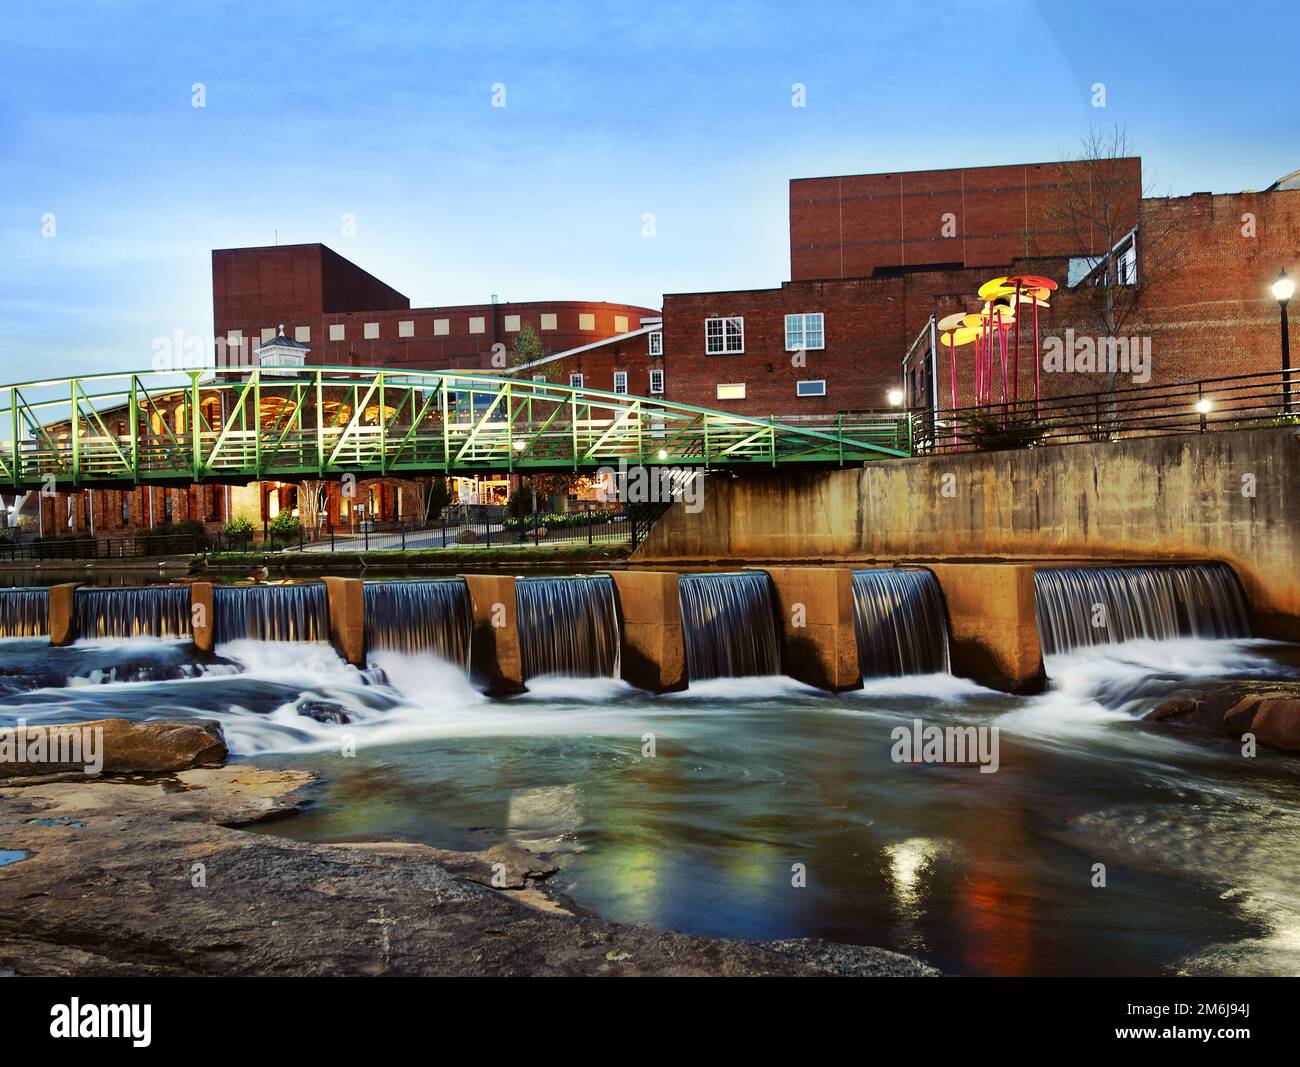 The Eugenia Duke bridge over the Reedy River in picturesque downtown Greenville South Carolina Stock Photo